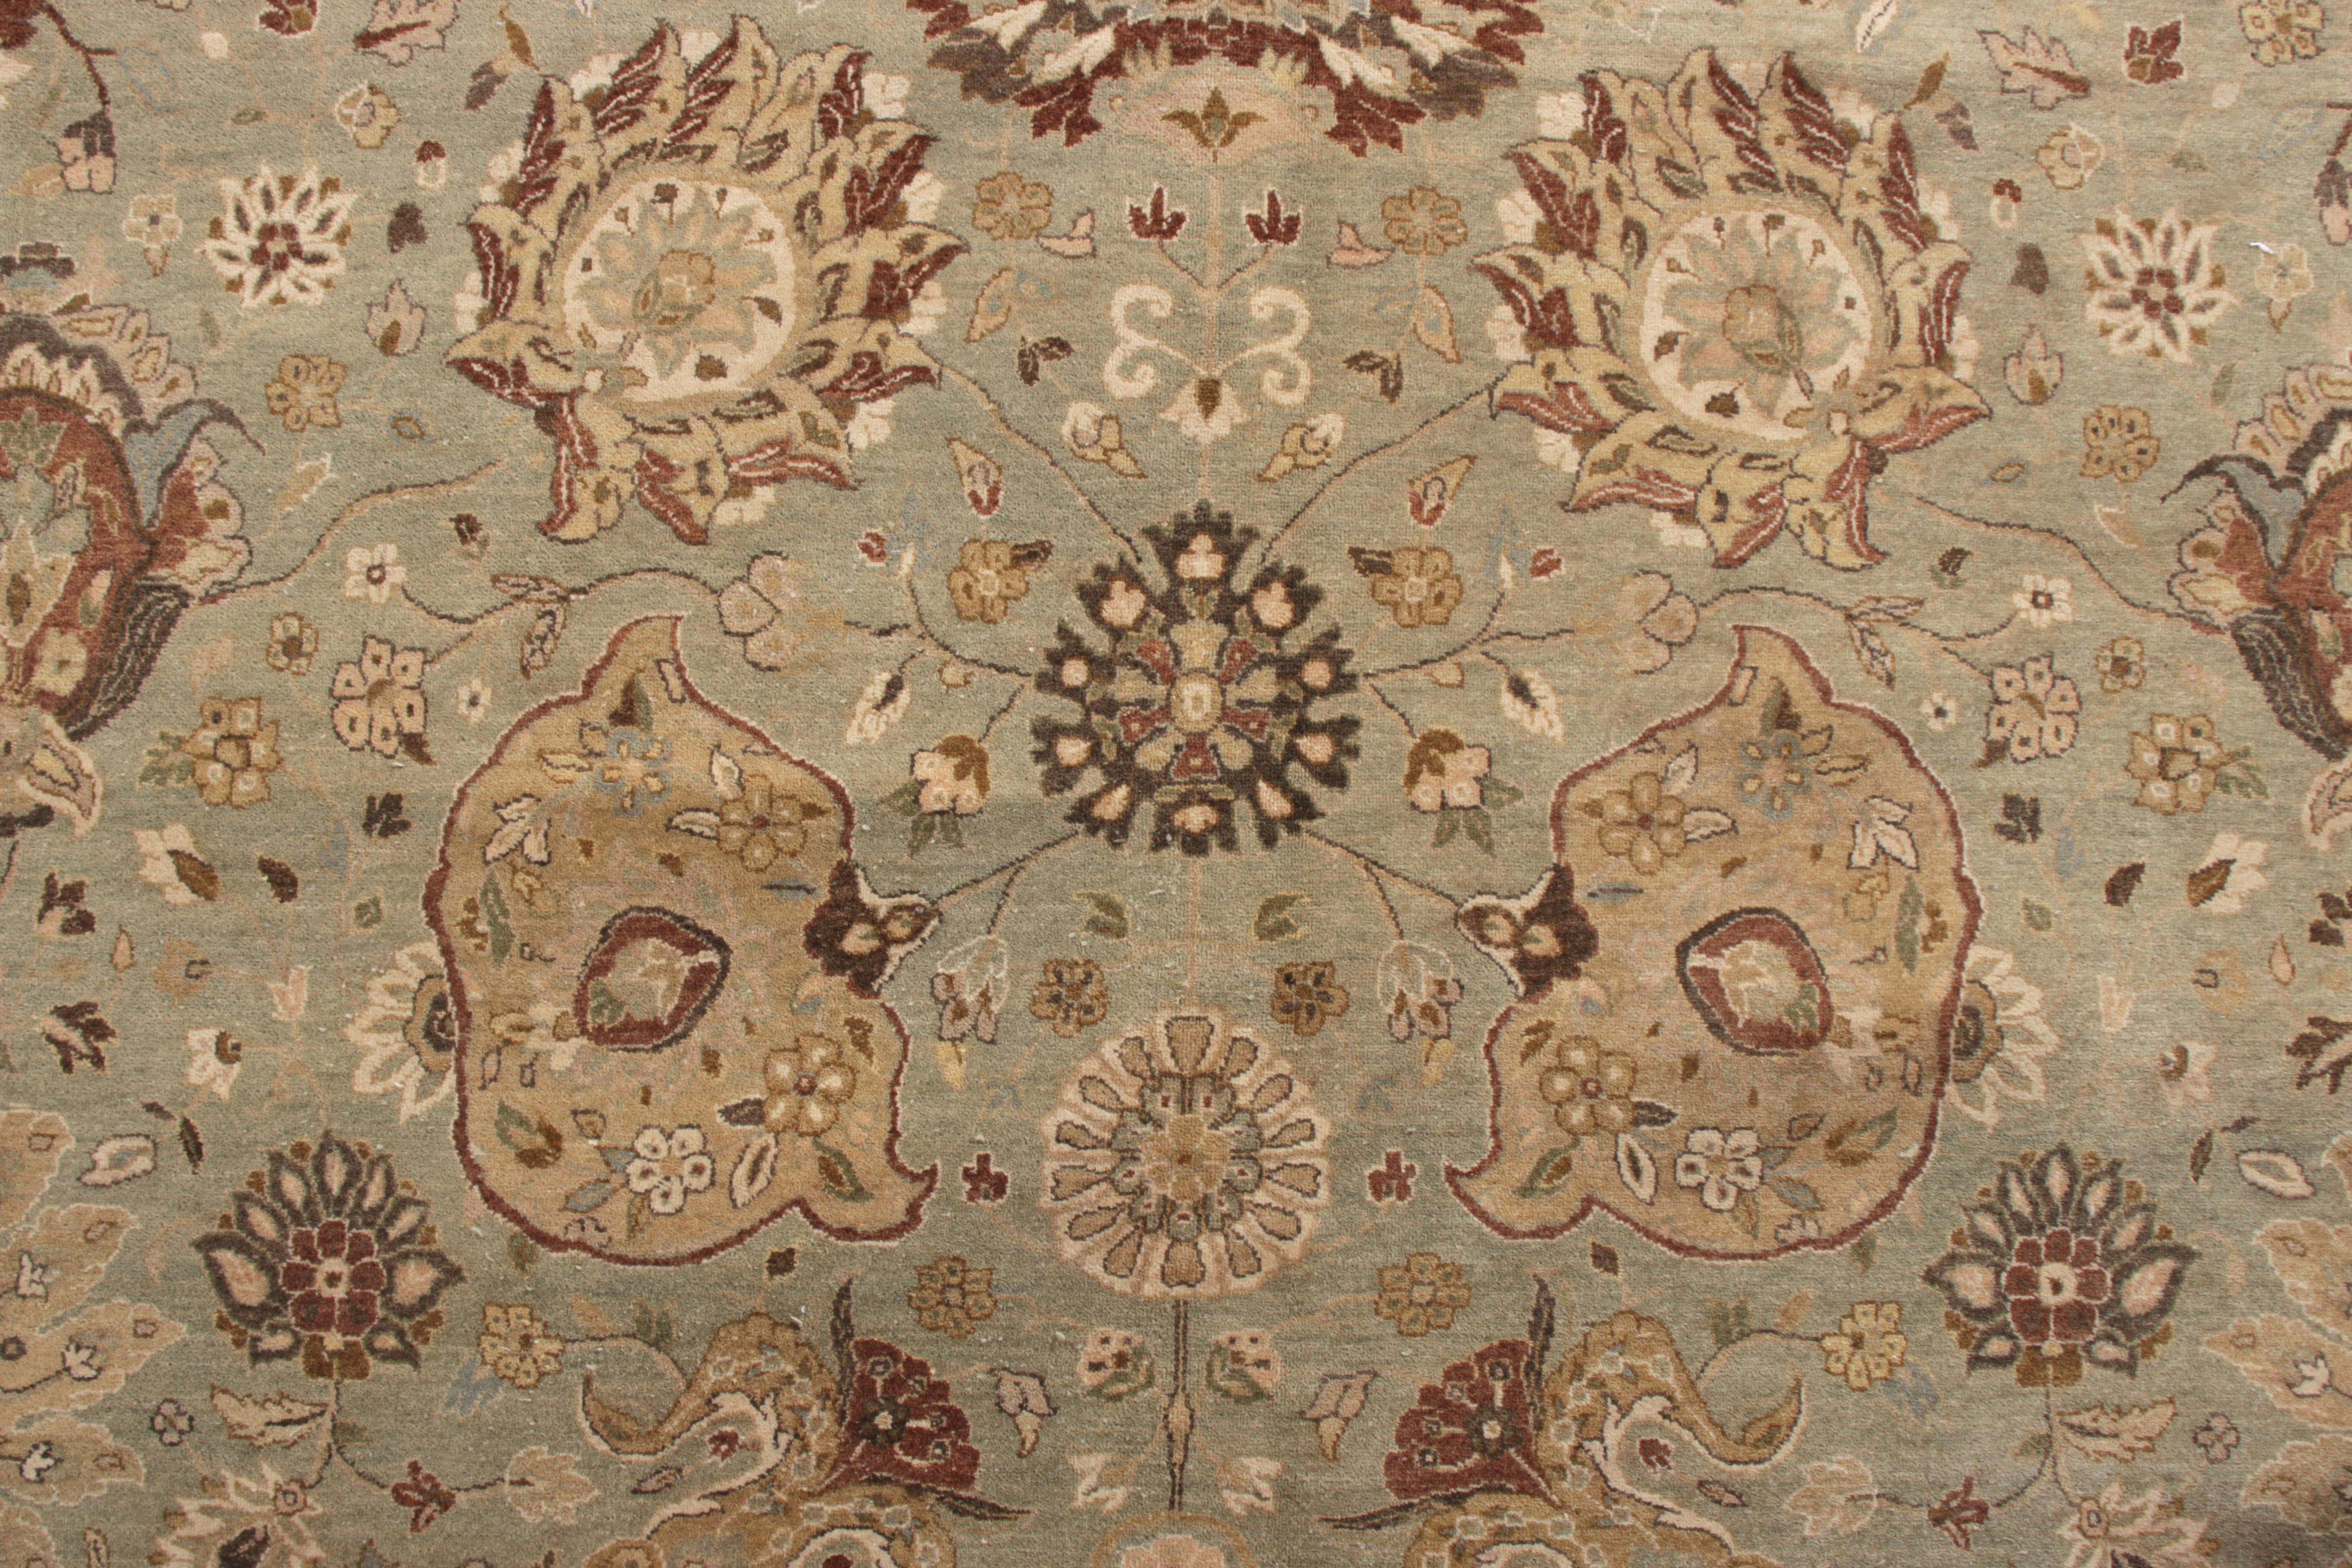 Hand-Knotted Rug & Kilim’s Tabriz style Rug in Beige-Brown and Green Floral Pattern